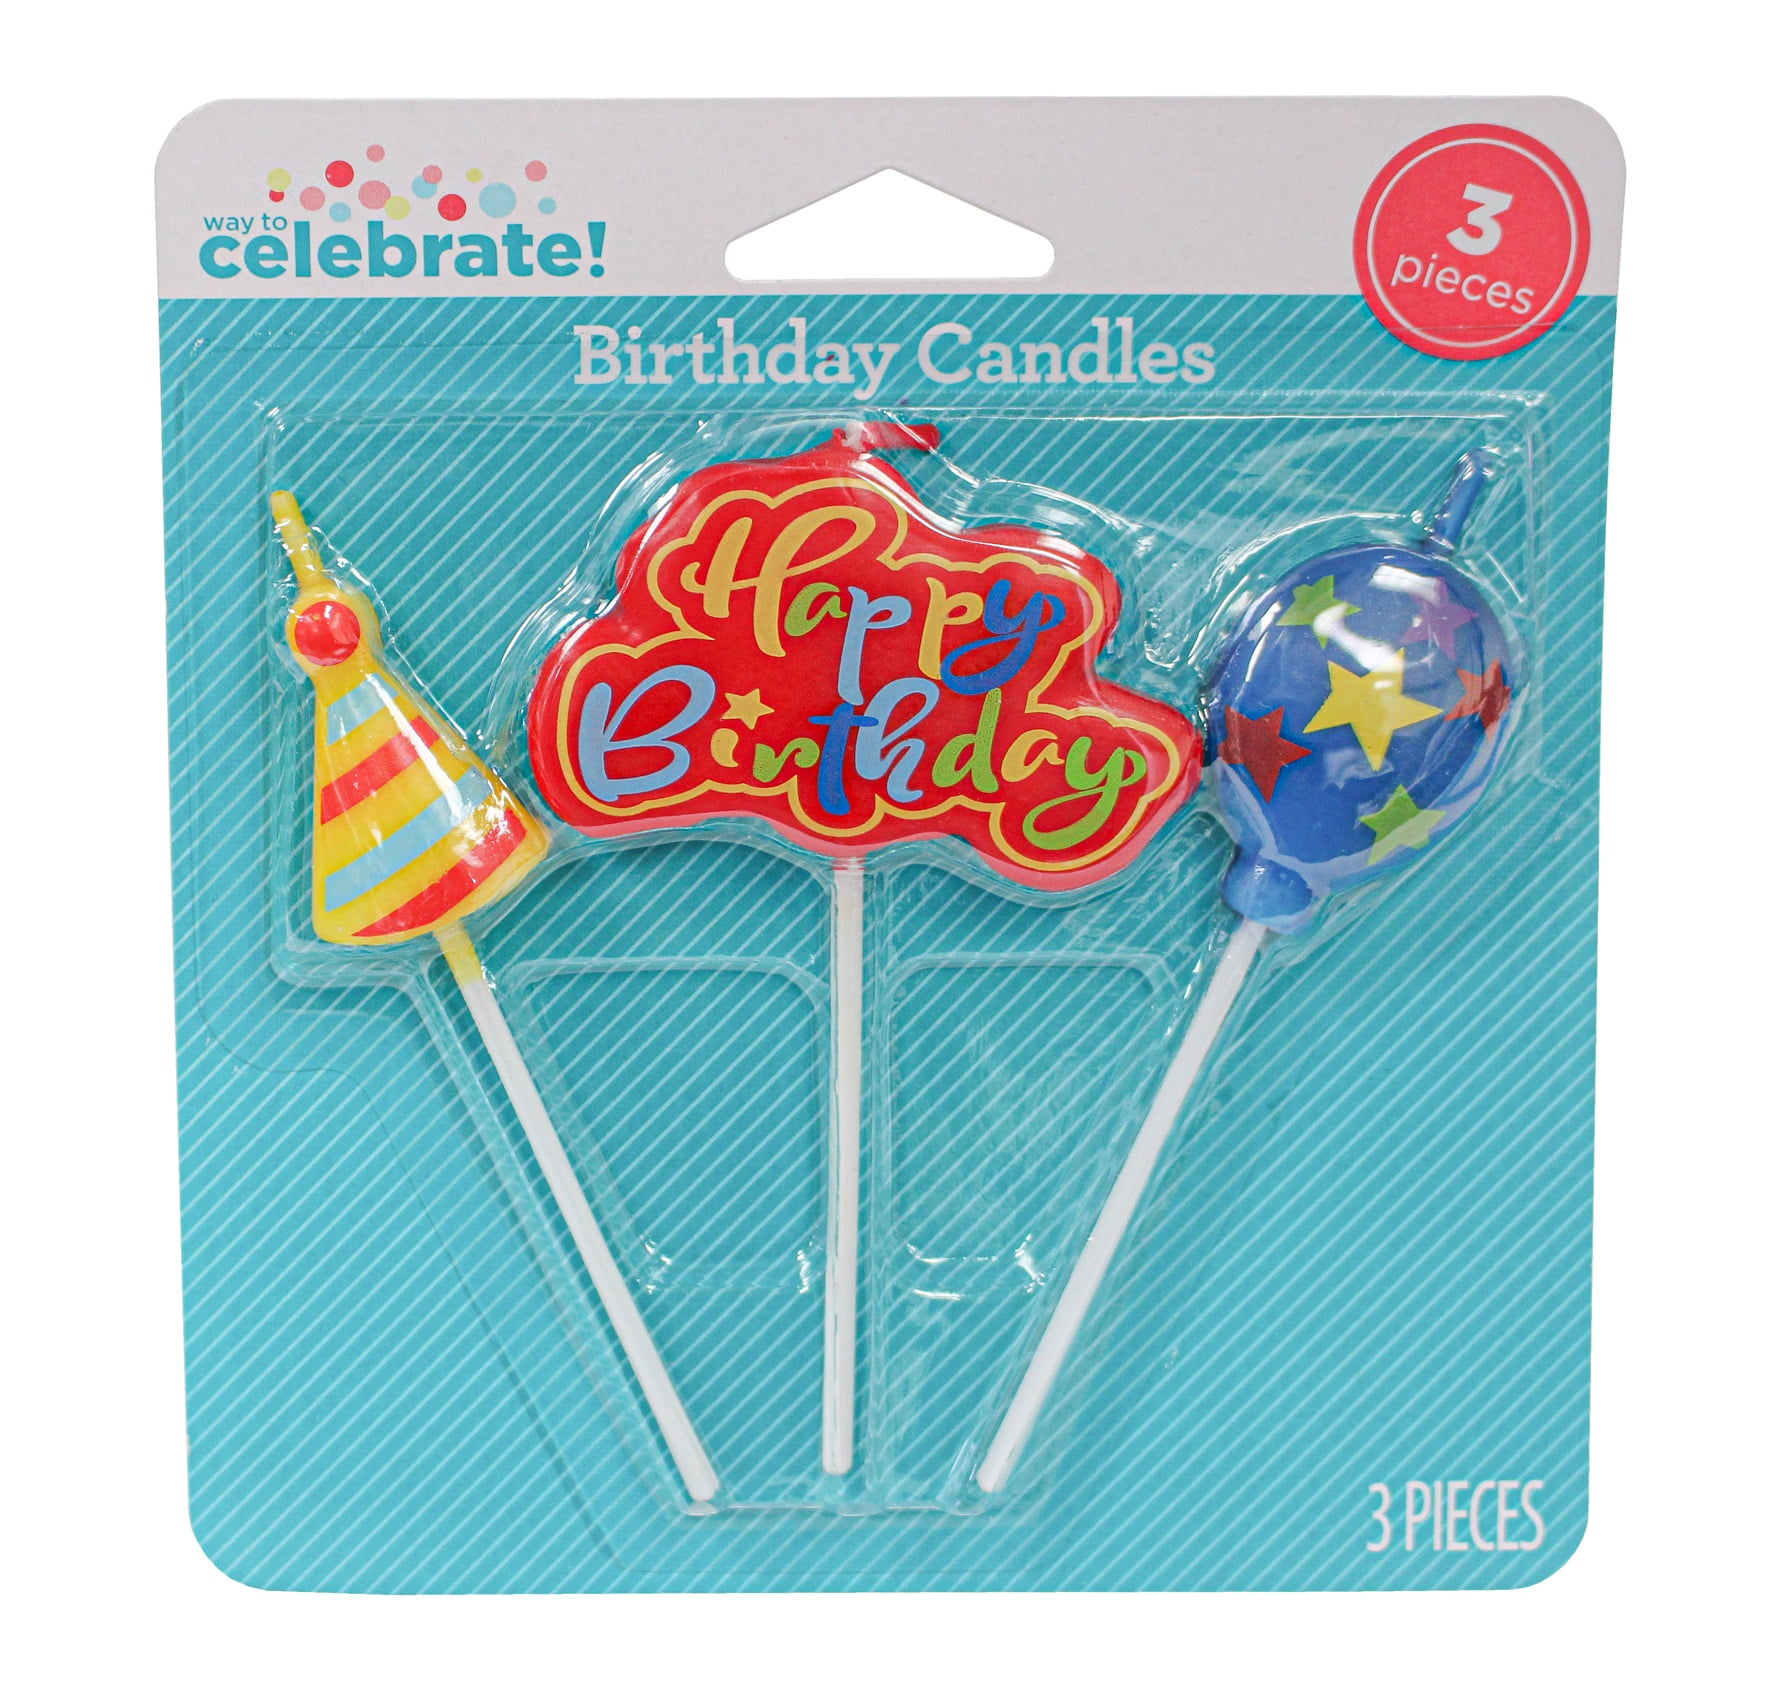 4Pcs/ Pack Sparklers Birthday Wedding Bottle/Cake Party Candles 4th July Memoria 